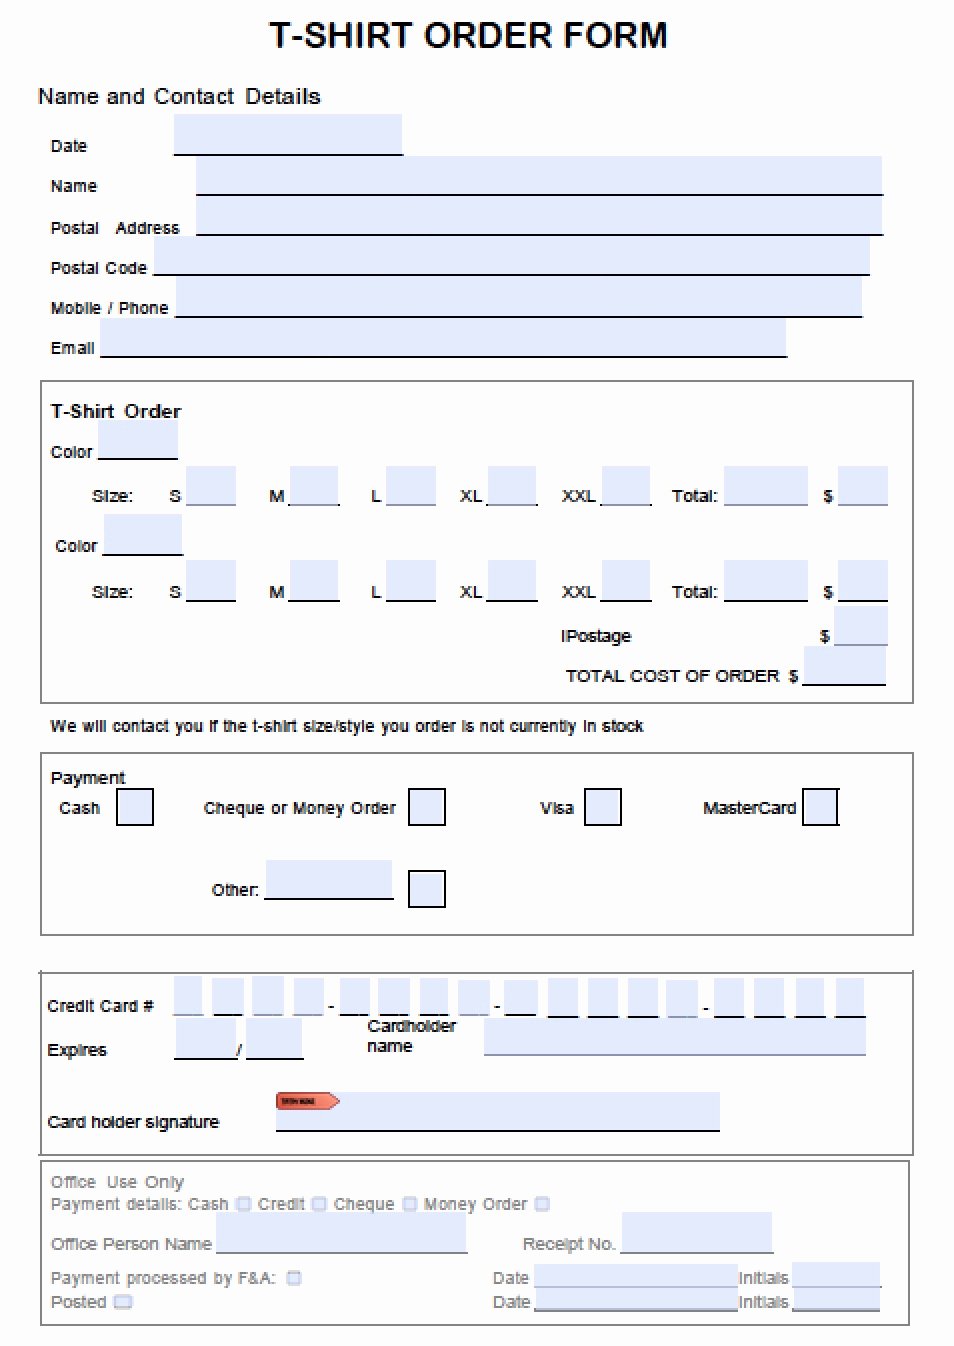 Clothing order form Templates Best Of T Shirt order form Template